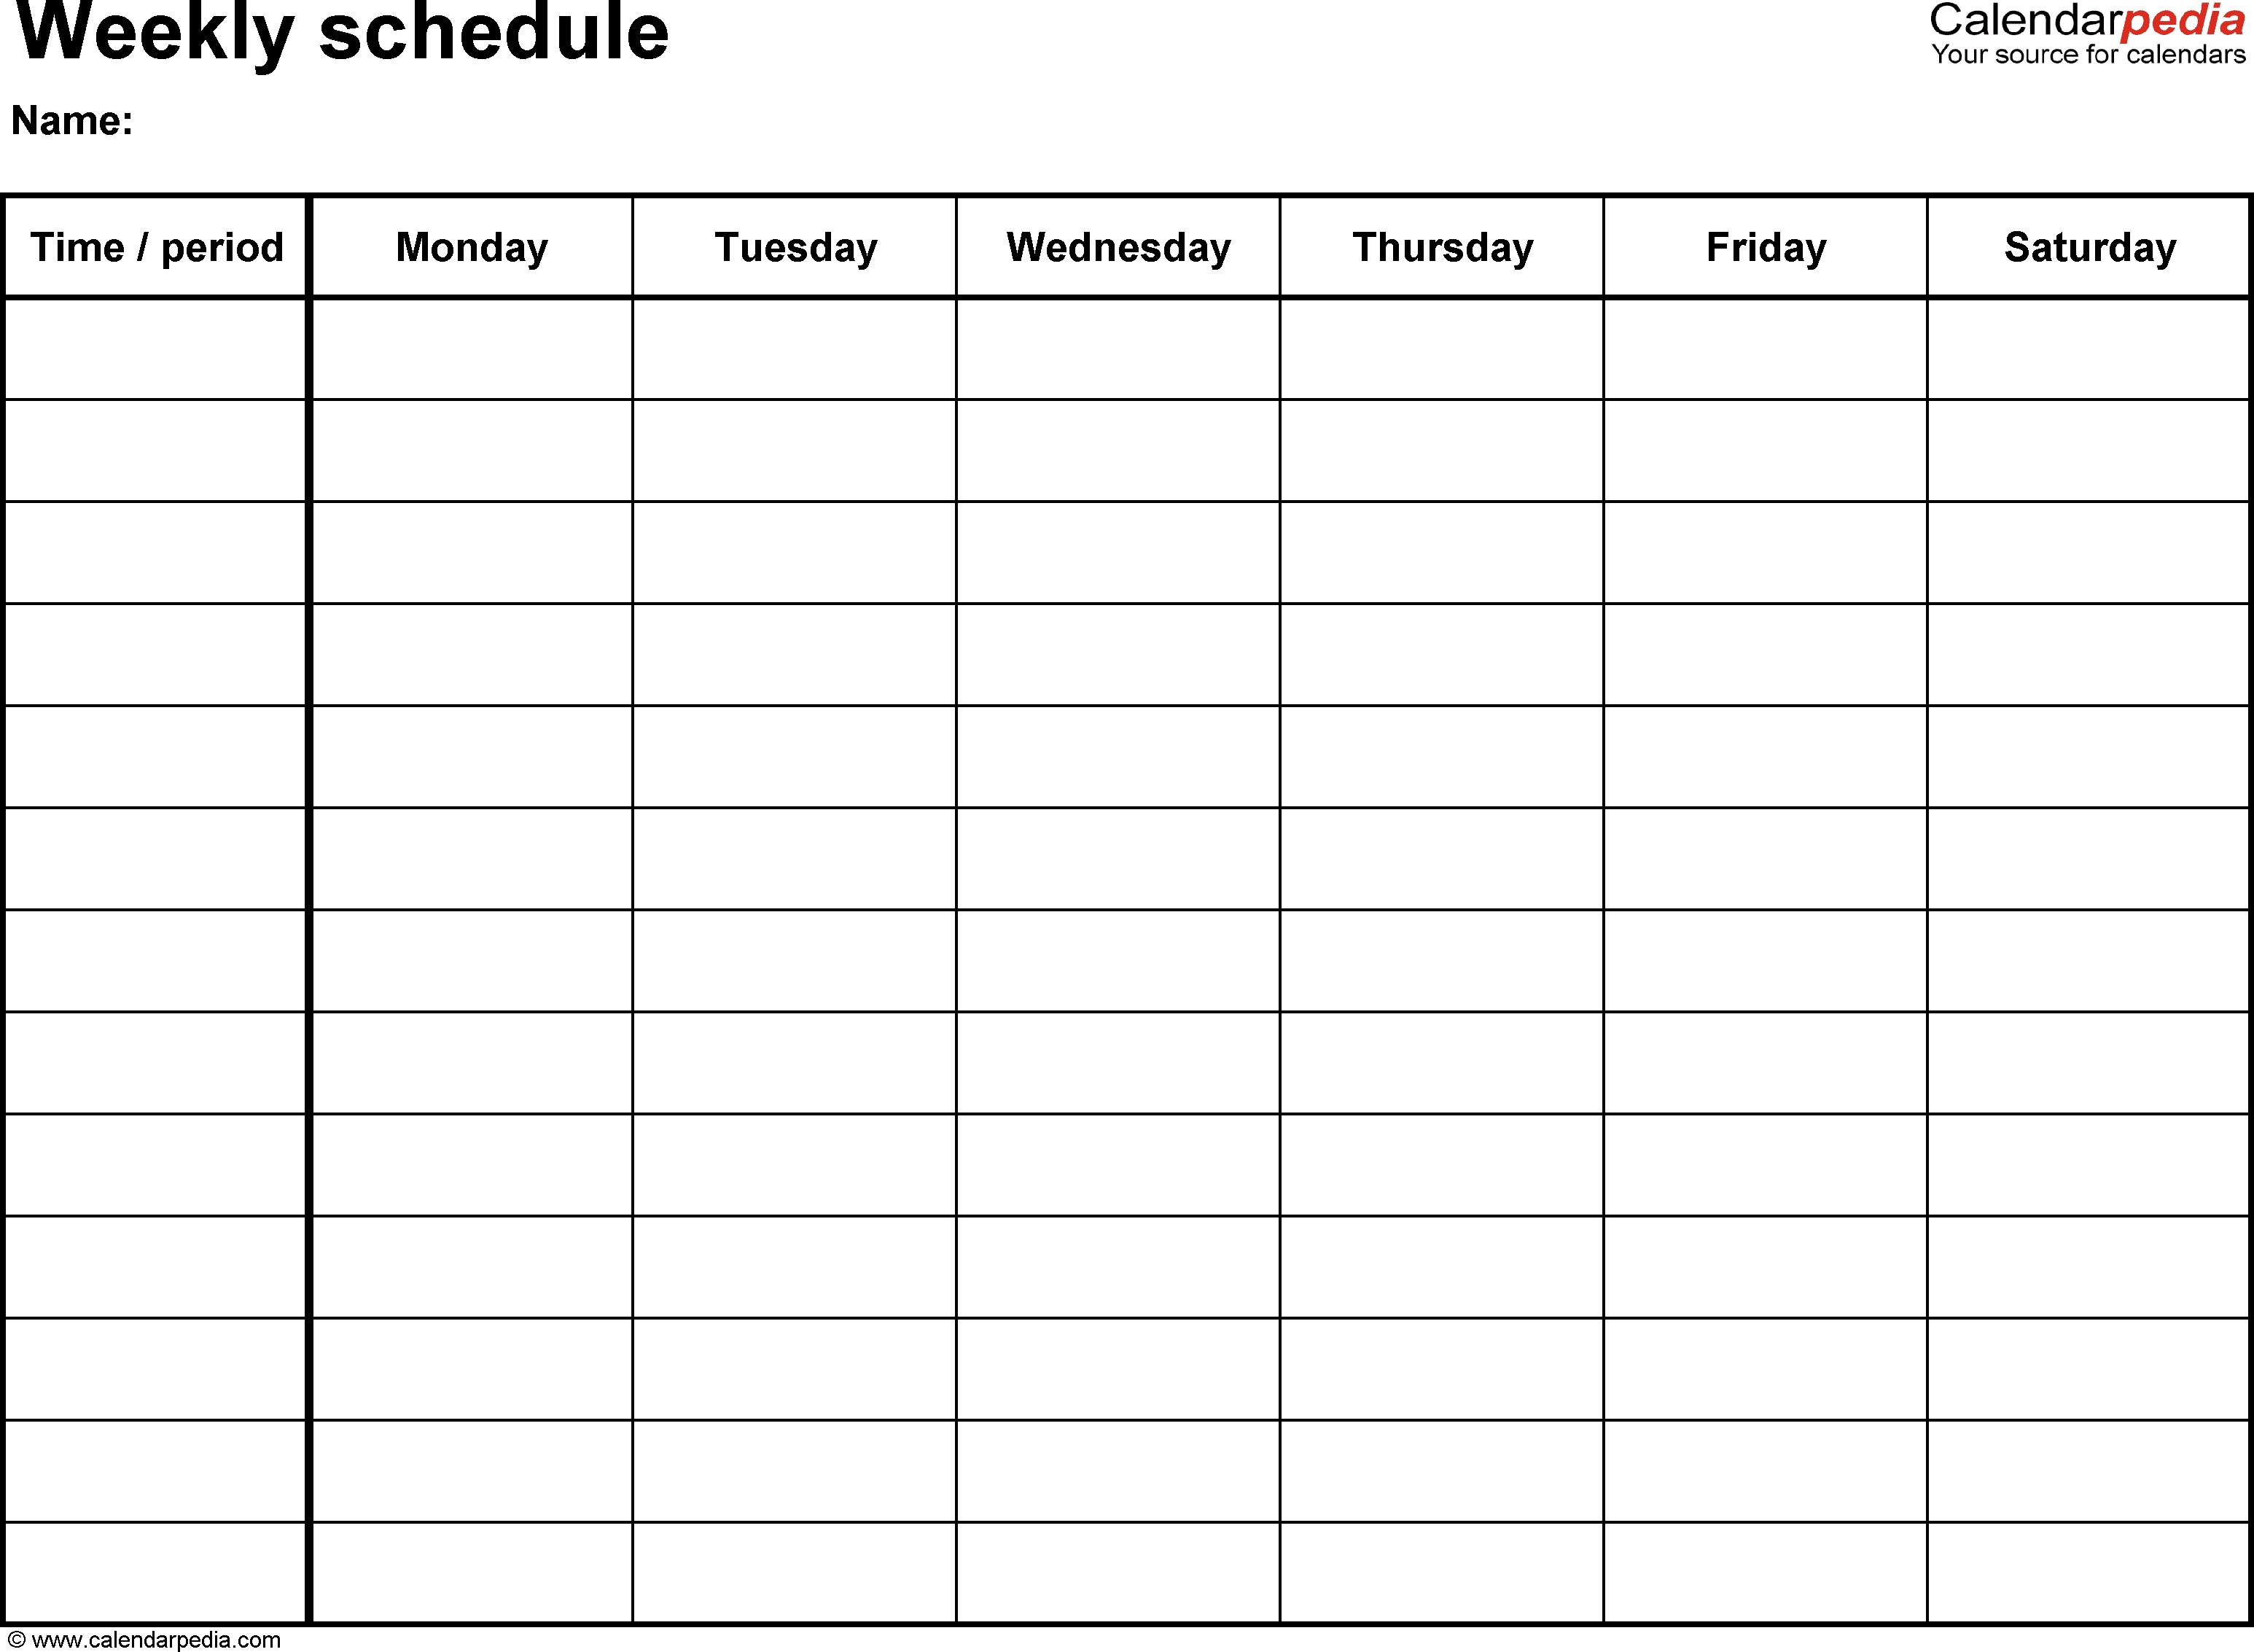 Free Weekly Schedule Templates For Word - 18 Templates in Blank 6 Week Calendar Template